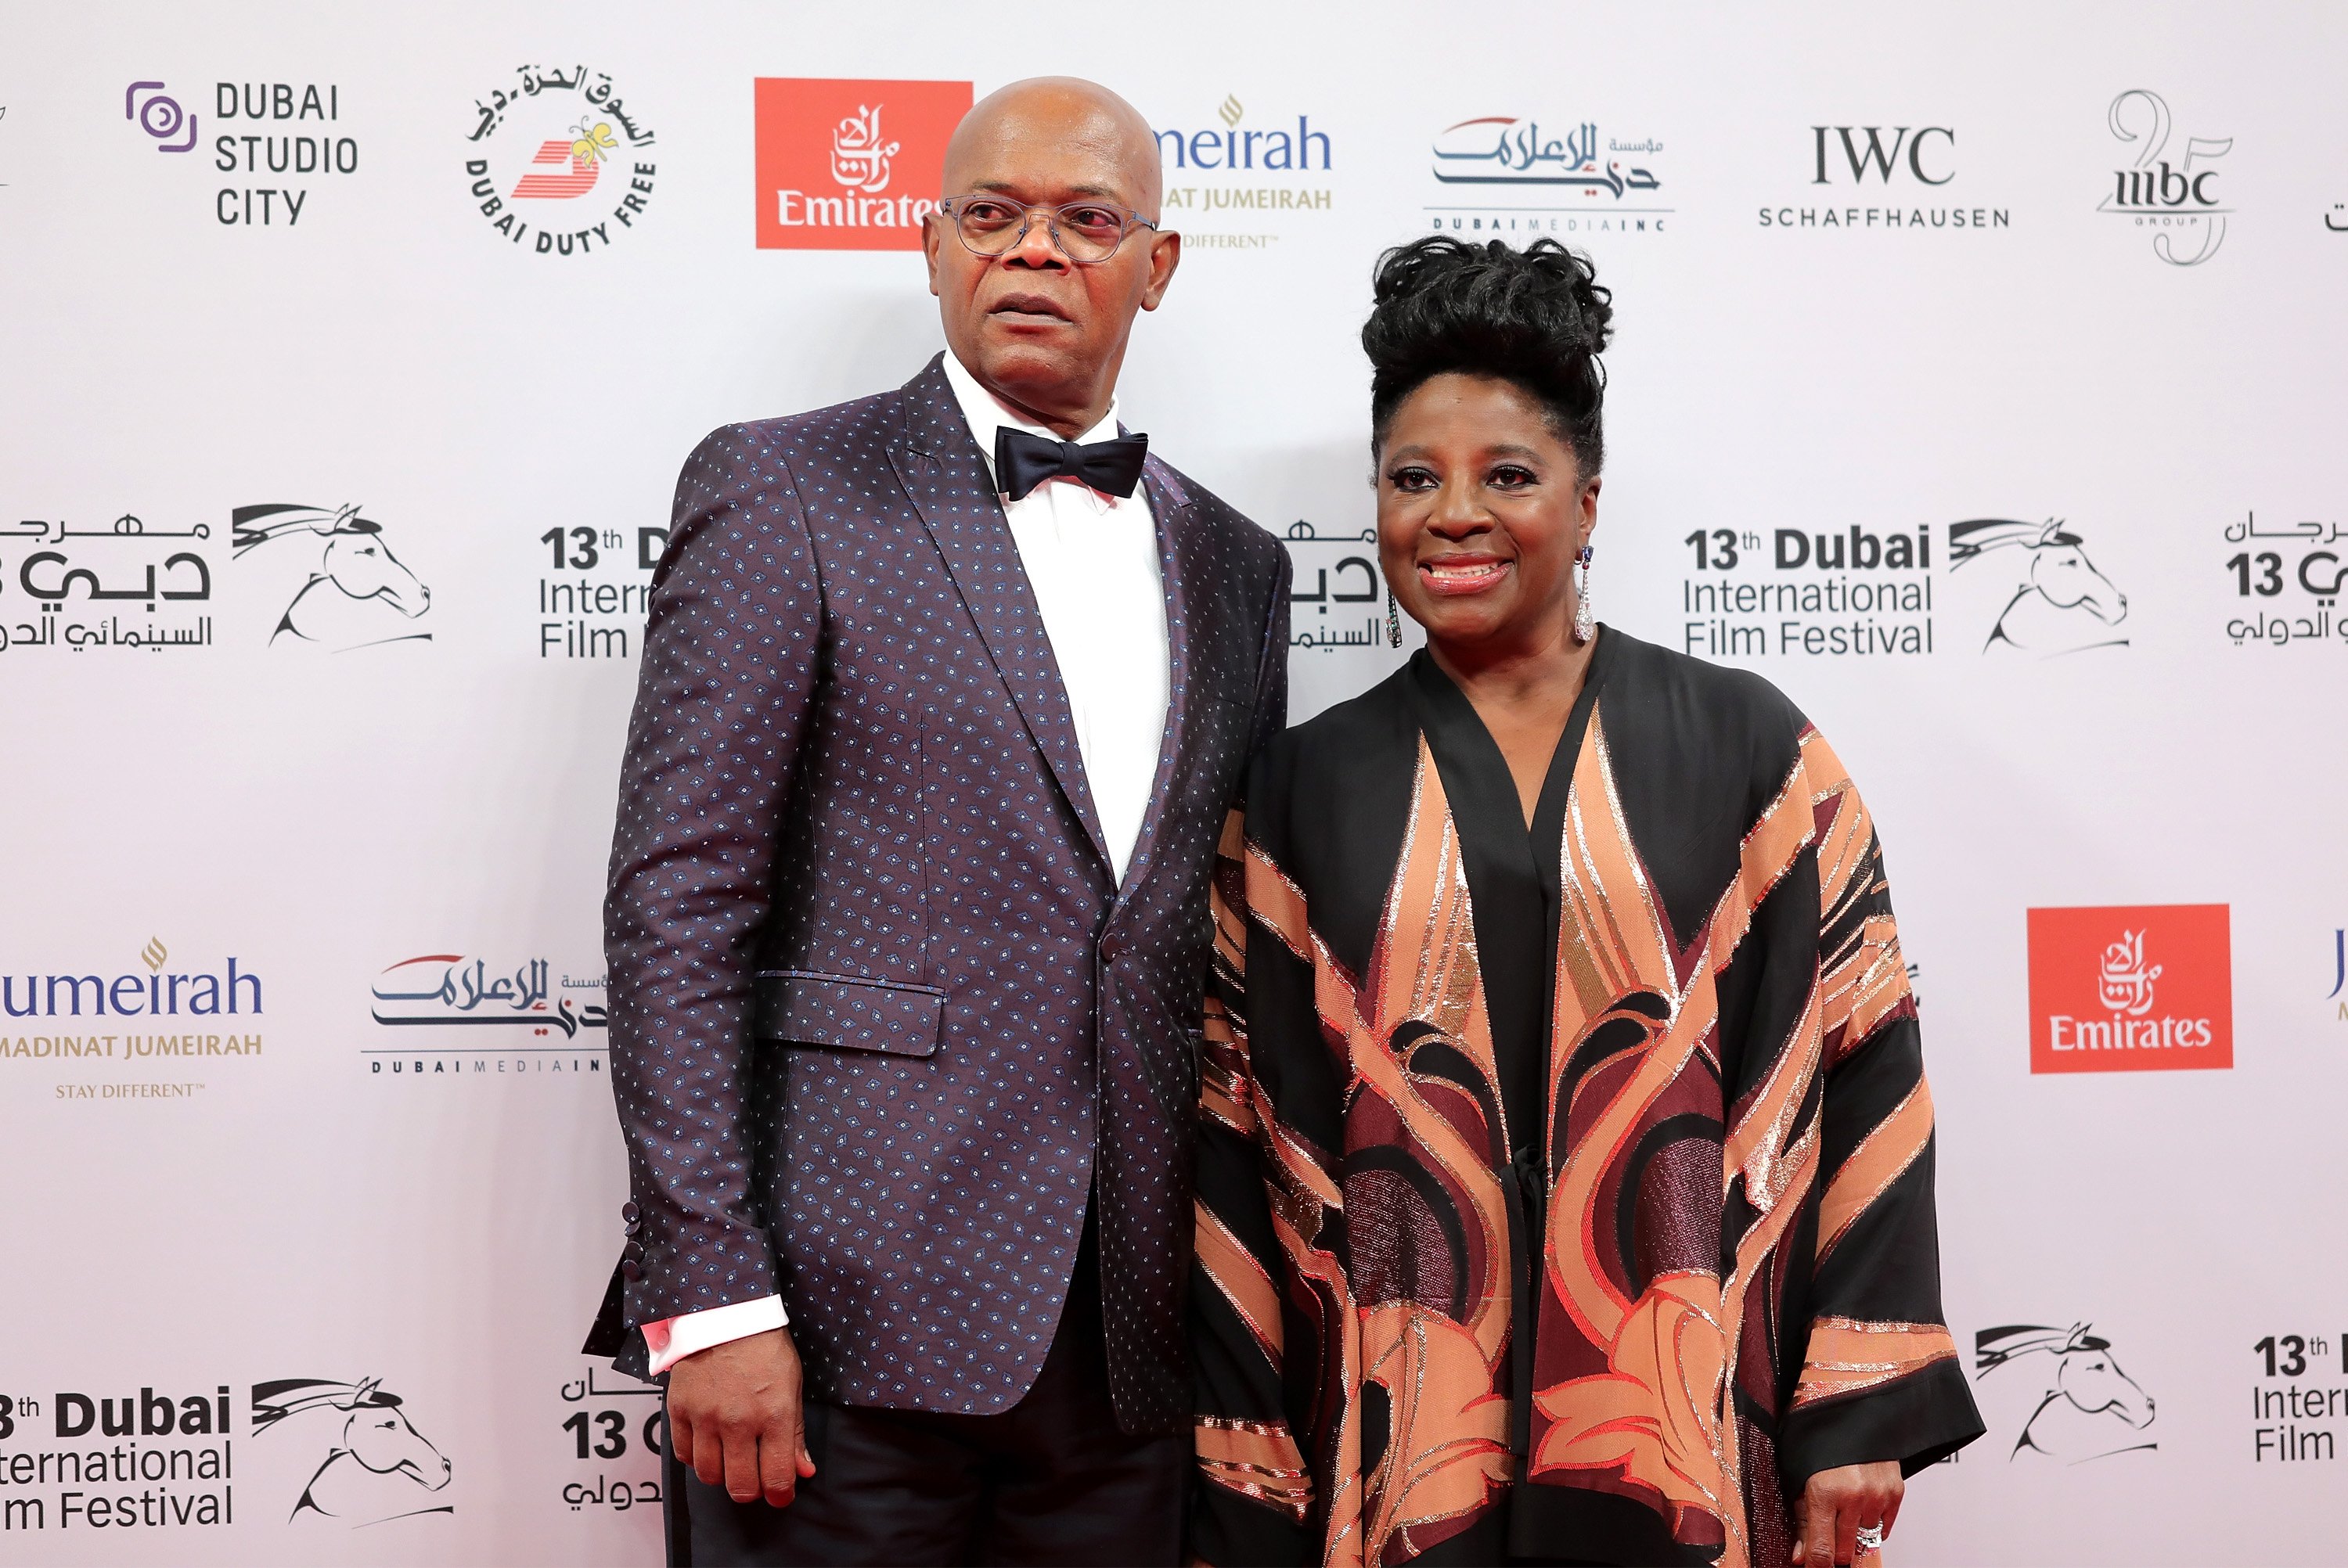 Samuel L Jackson with his wife LaTanya Richardson attend the 13th annual Dubai International Film Festival held at the Madinat Jumeriah Complex on December 7, 2016 in Dubai, United Arab Emirates. | Source: Getty Images.